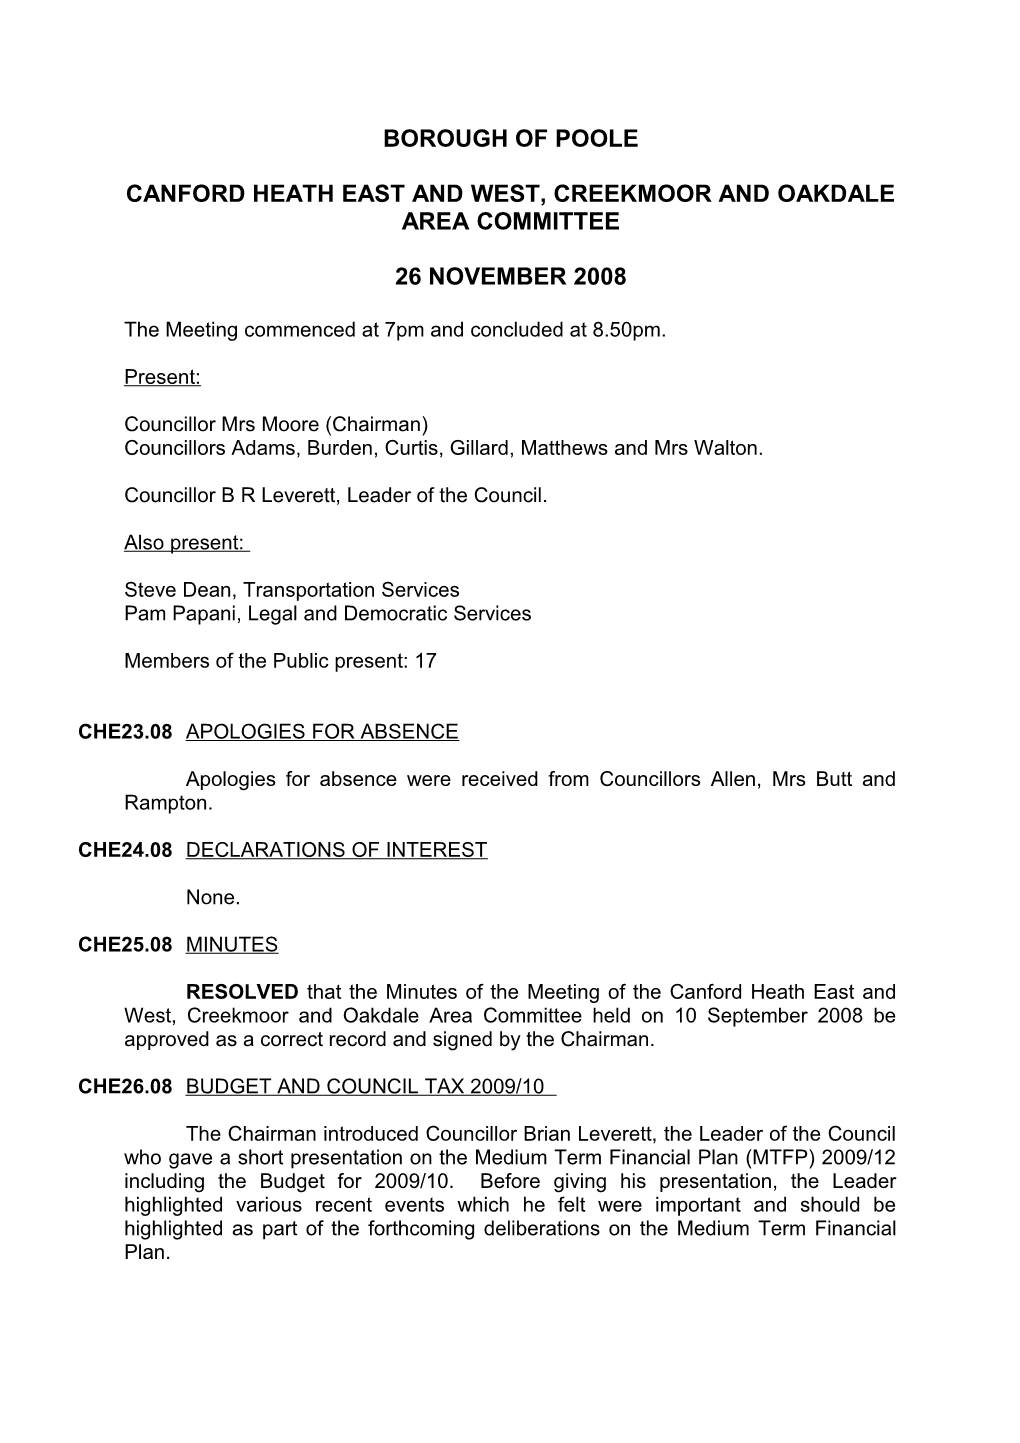 Minutes - Canford Heath East and West, Oakdale and Creekmoor Area Committee - 26 November 2008